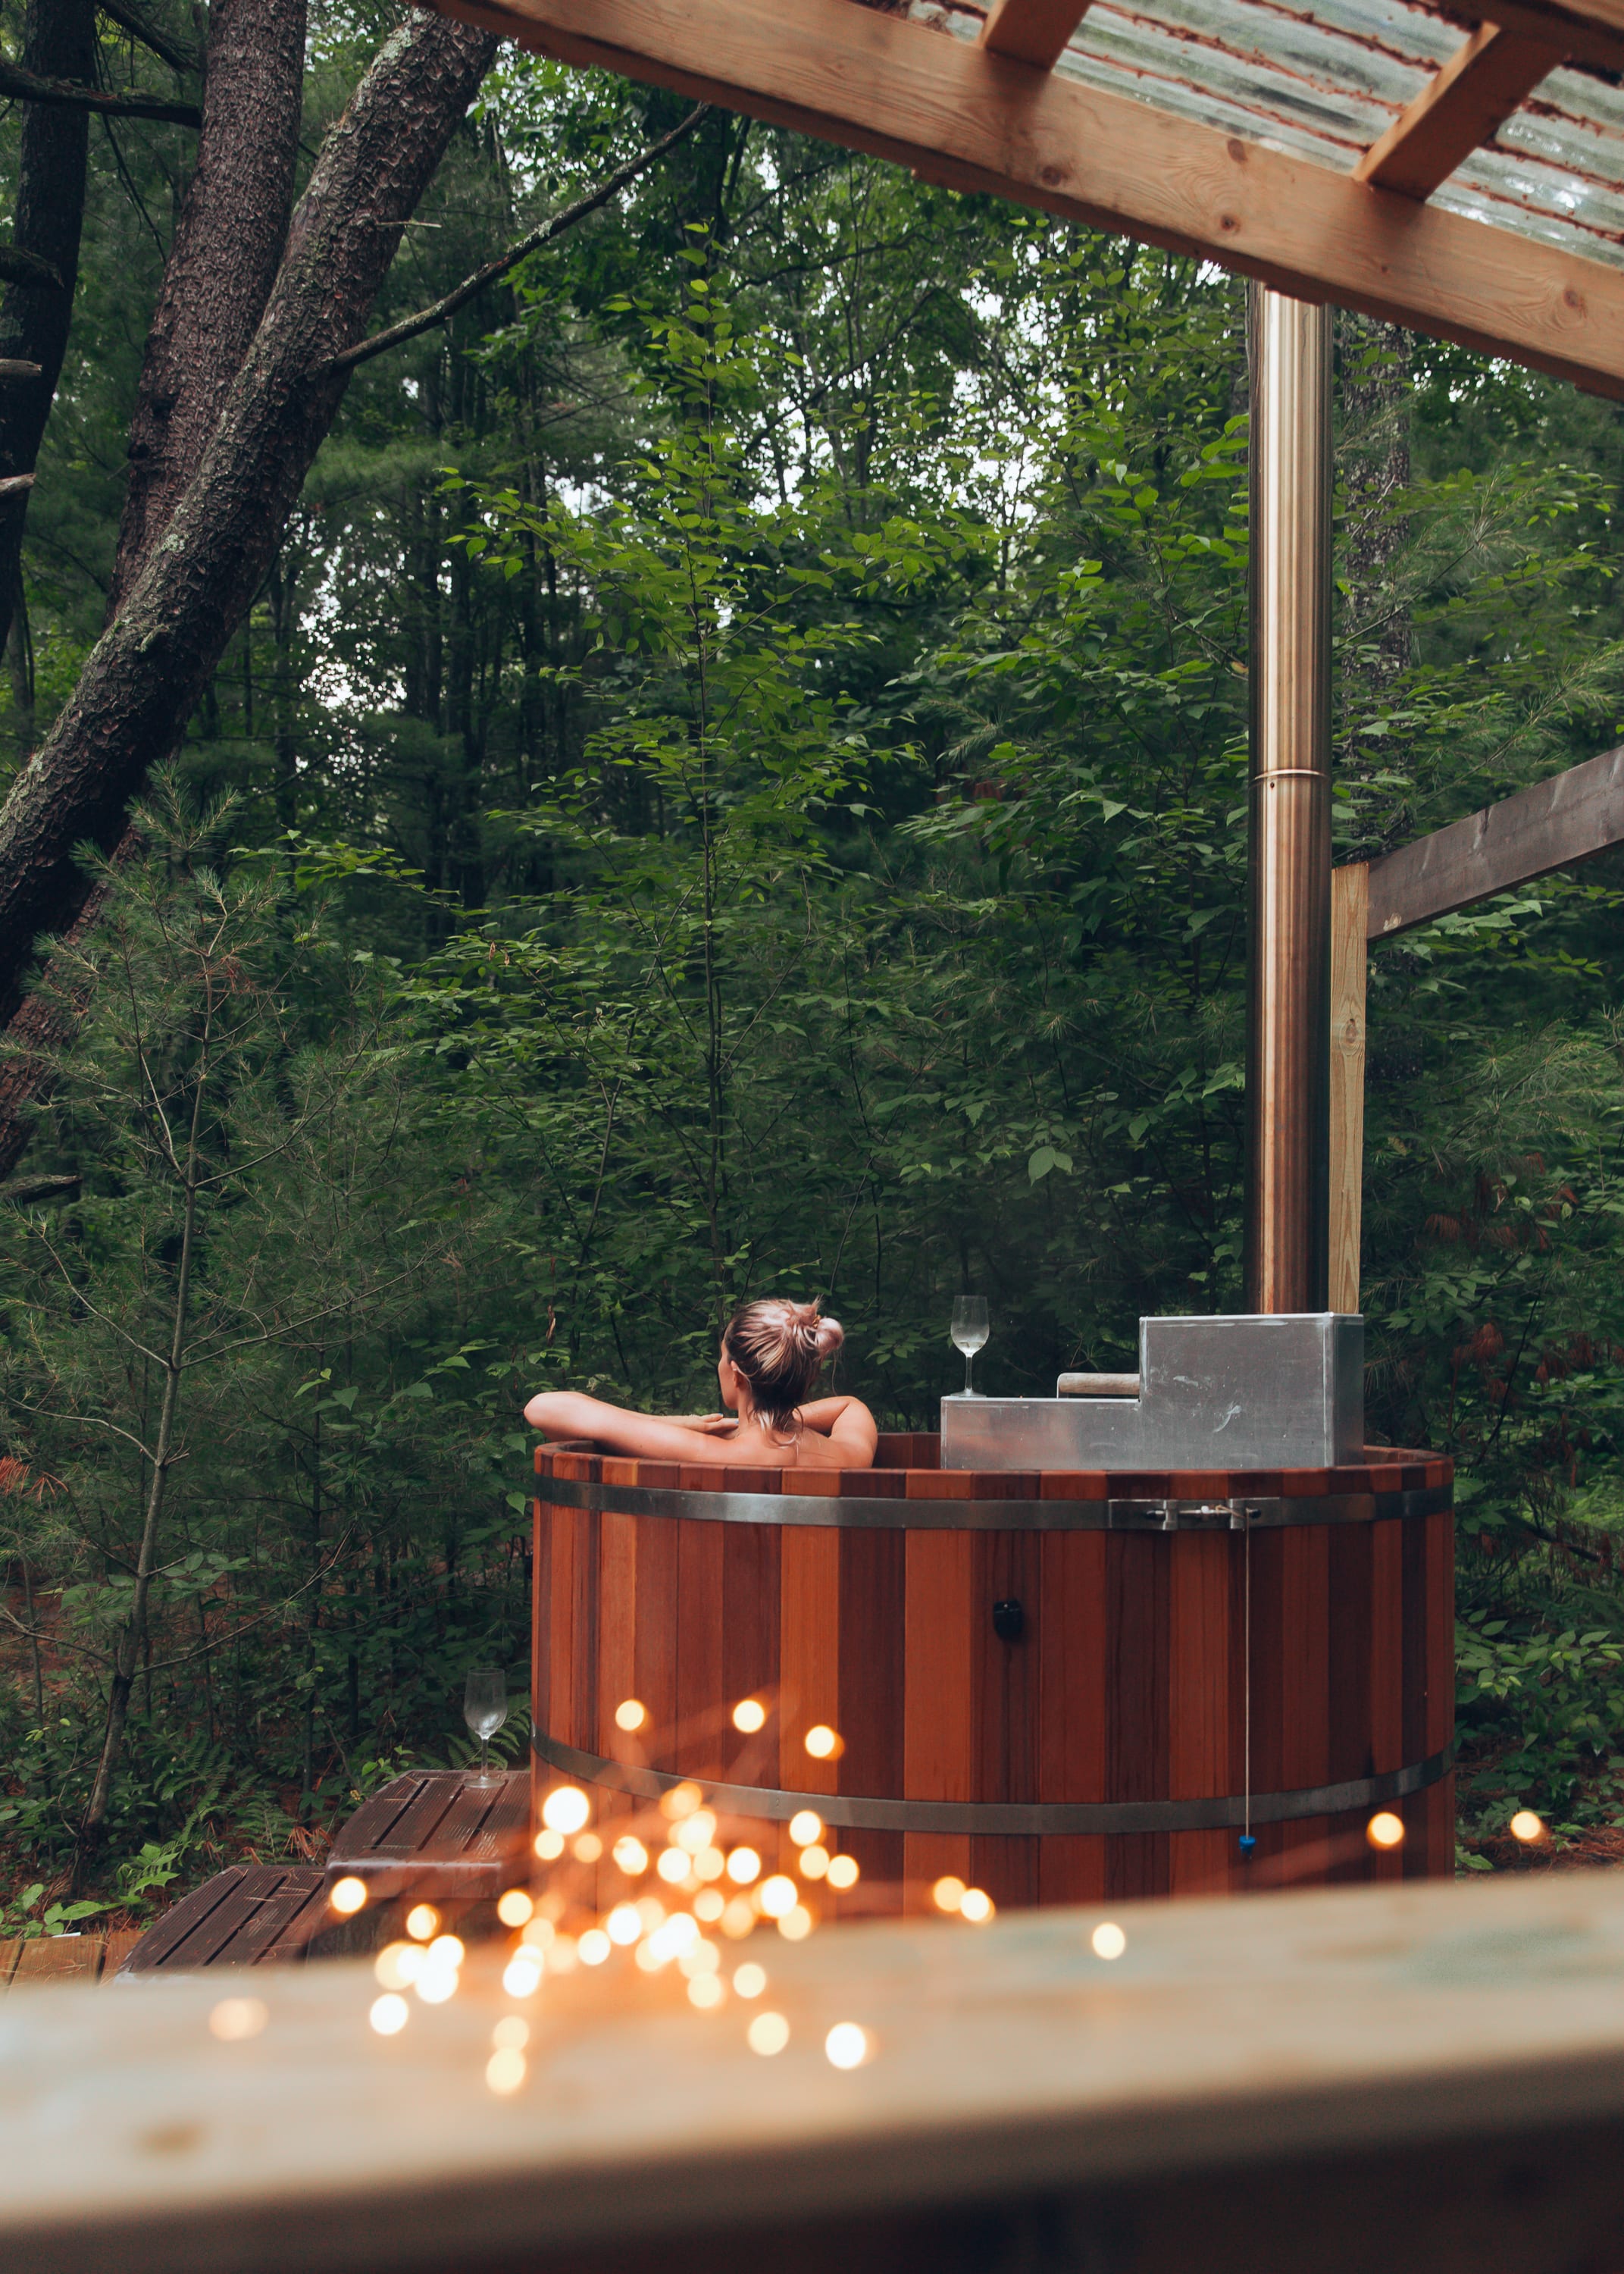 Woodfired cedar hot tub for ultimate relaxation